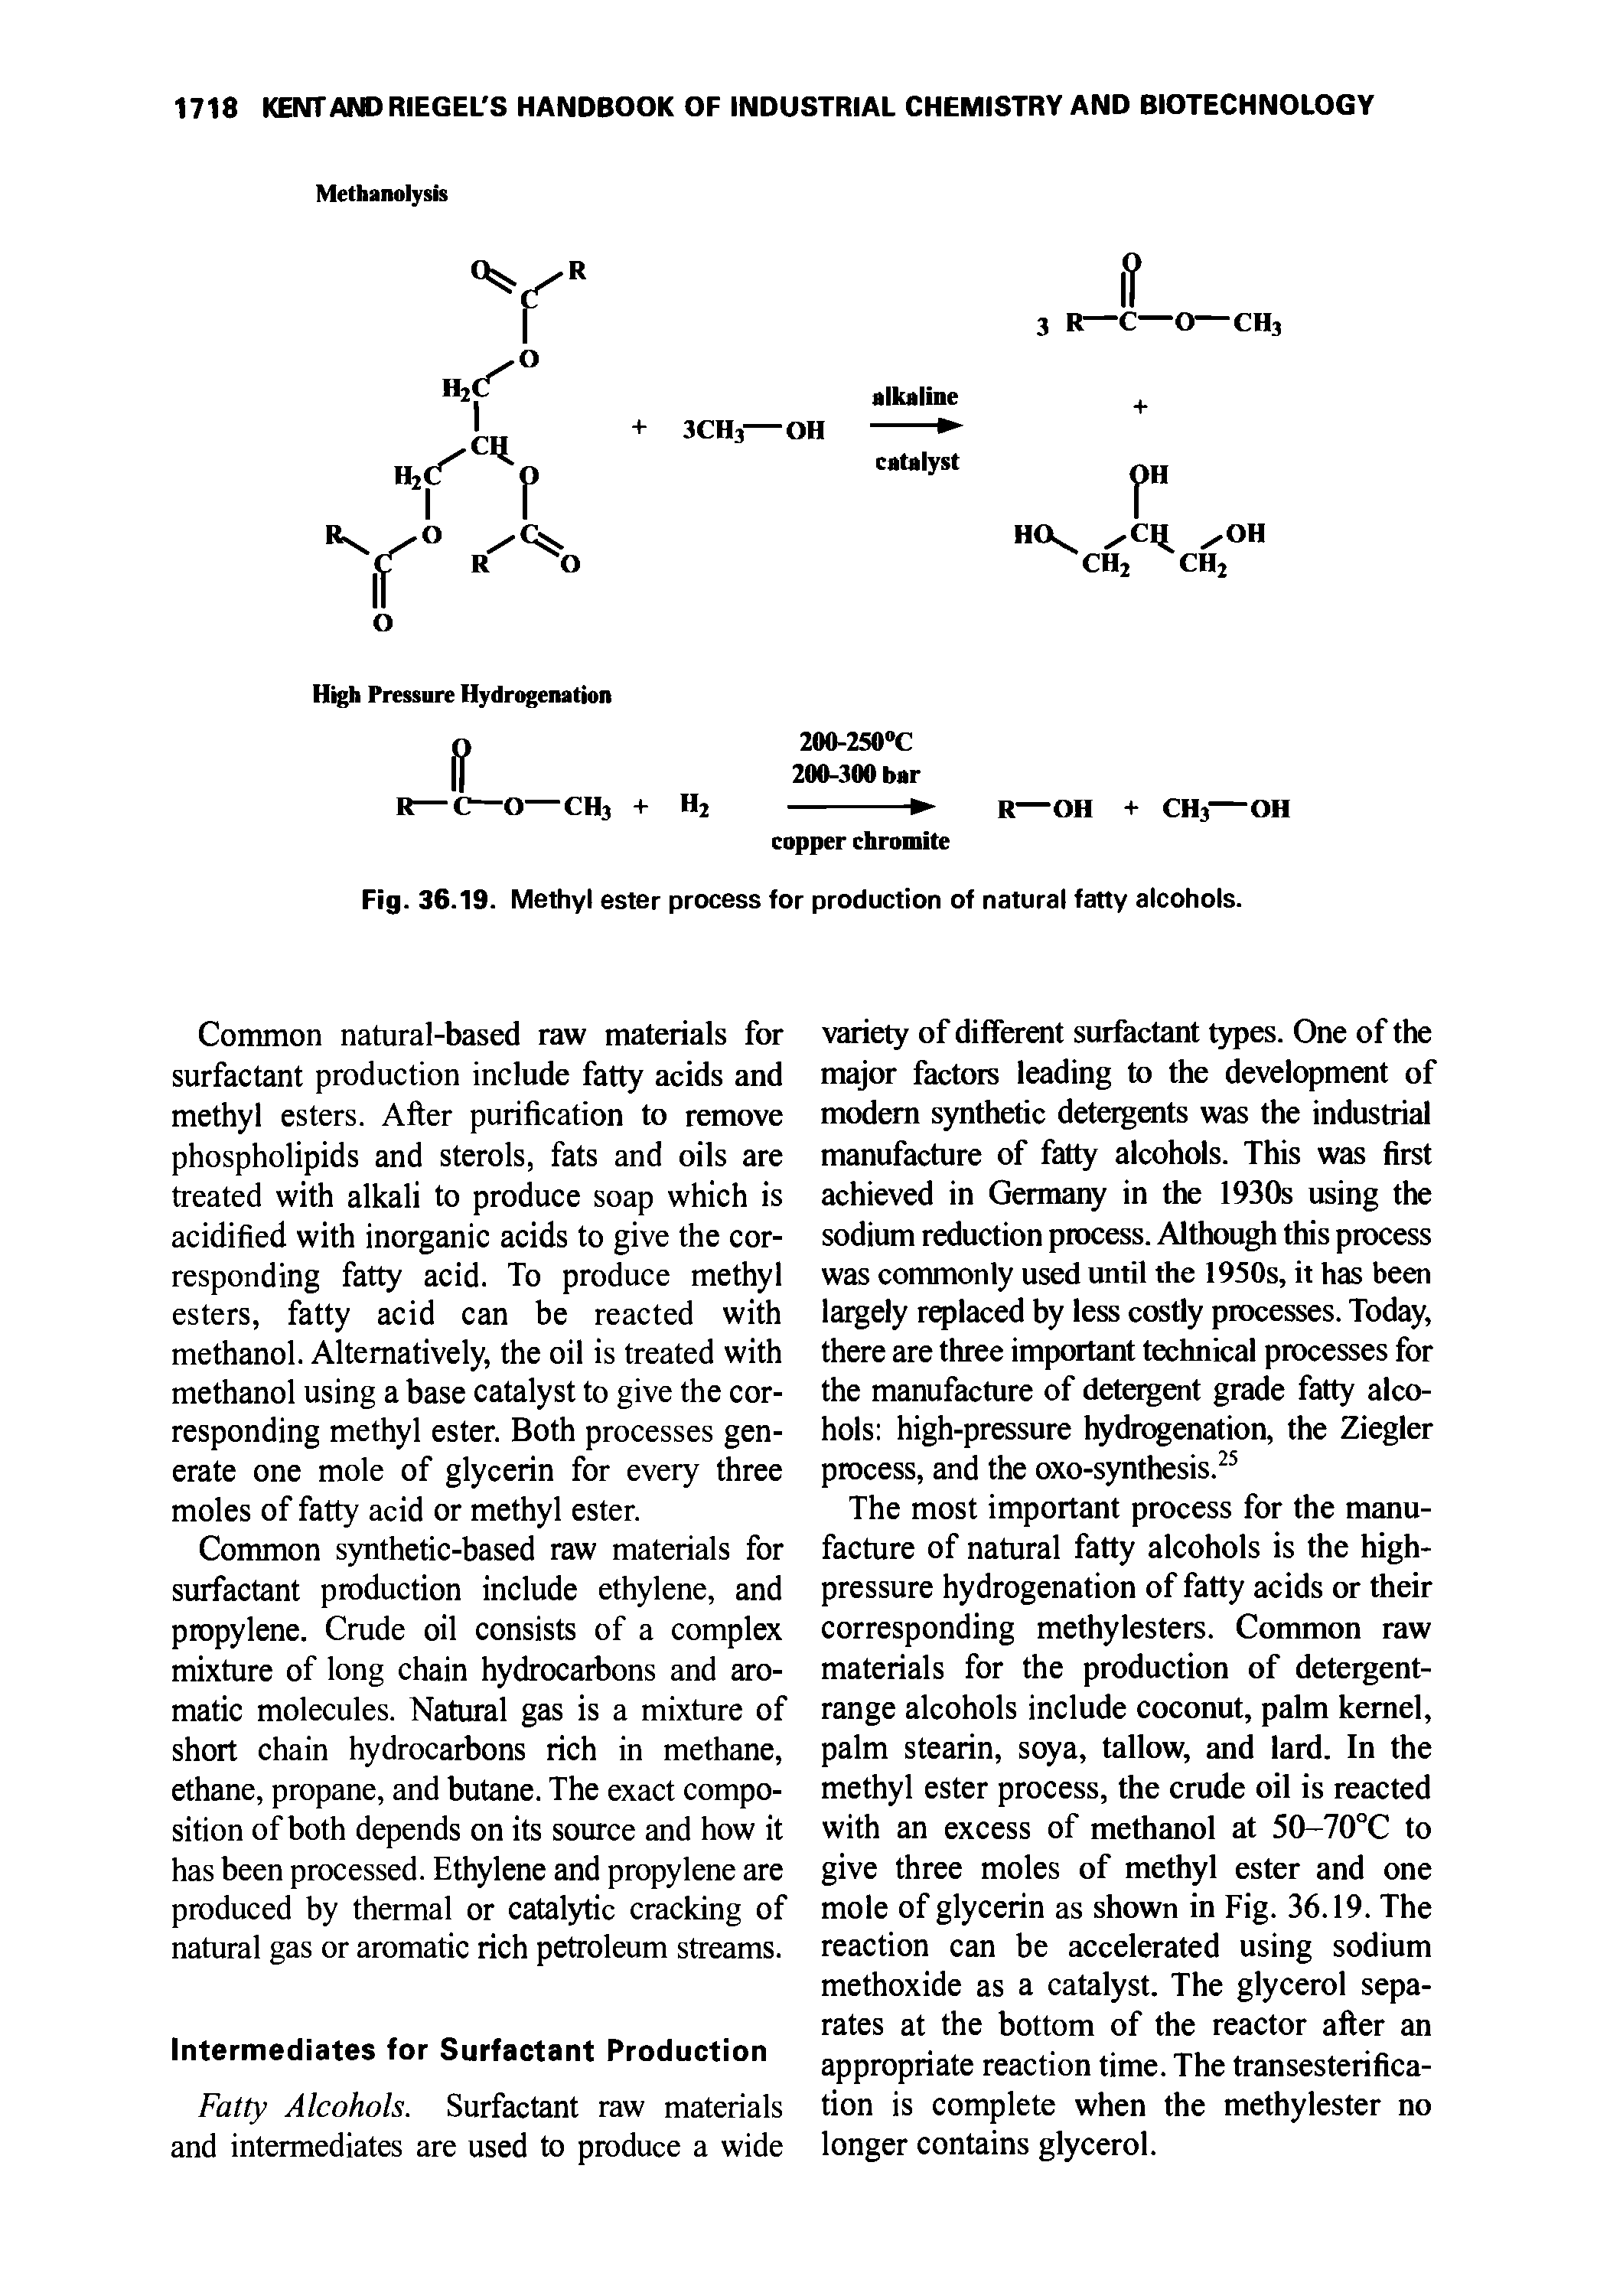 Fig. 36.19. Methyl ester process for production of natural fatty alcohols.